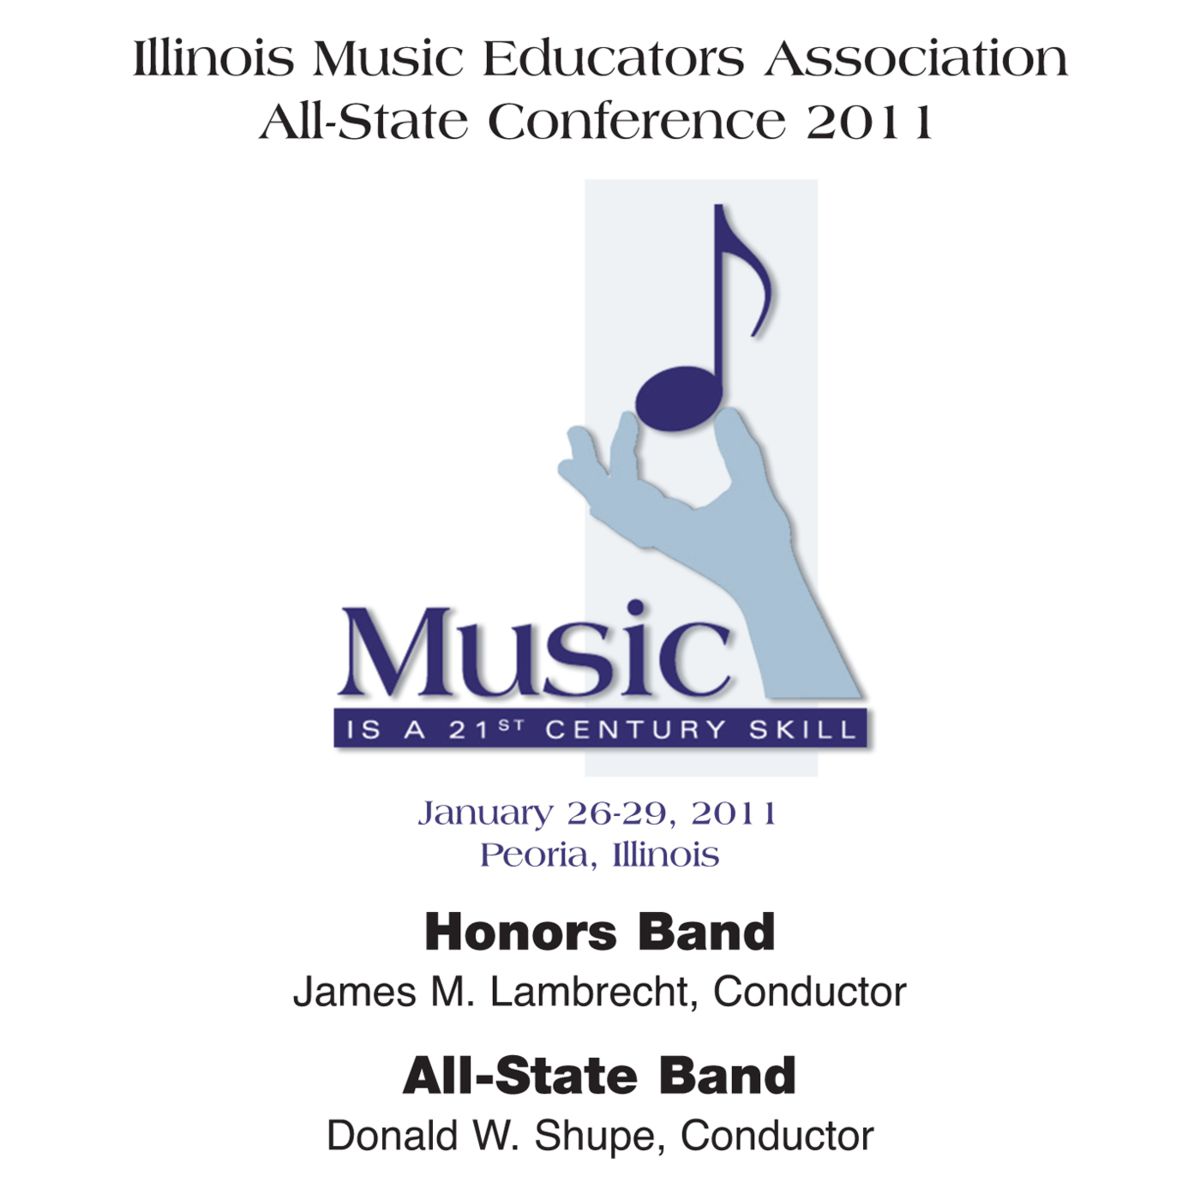 2011 Illinois Music Educators Association: Honors Band and All-State Band - klik hier